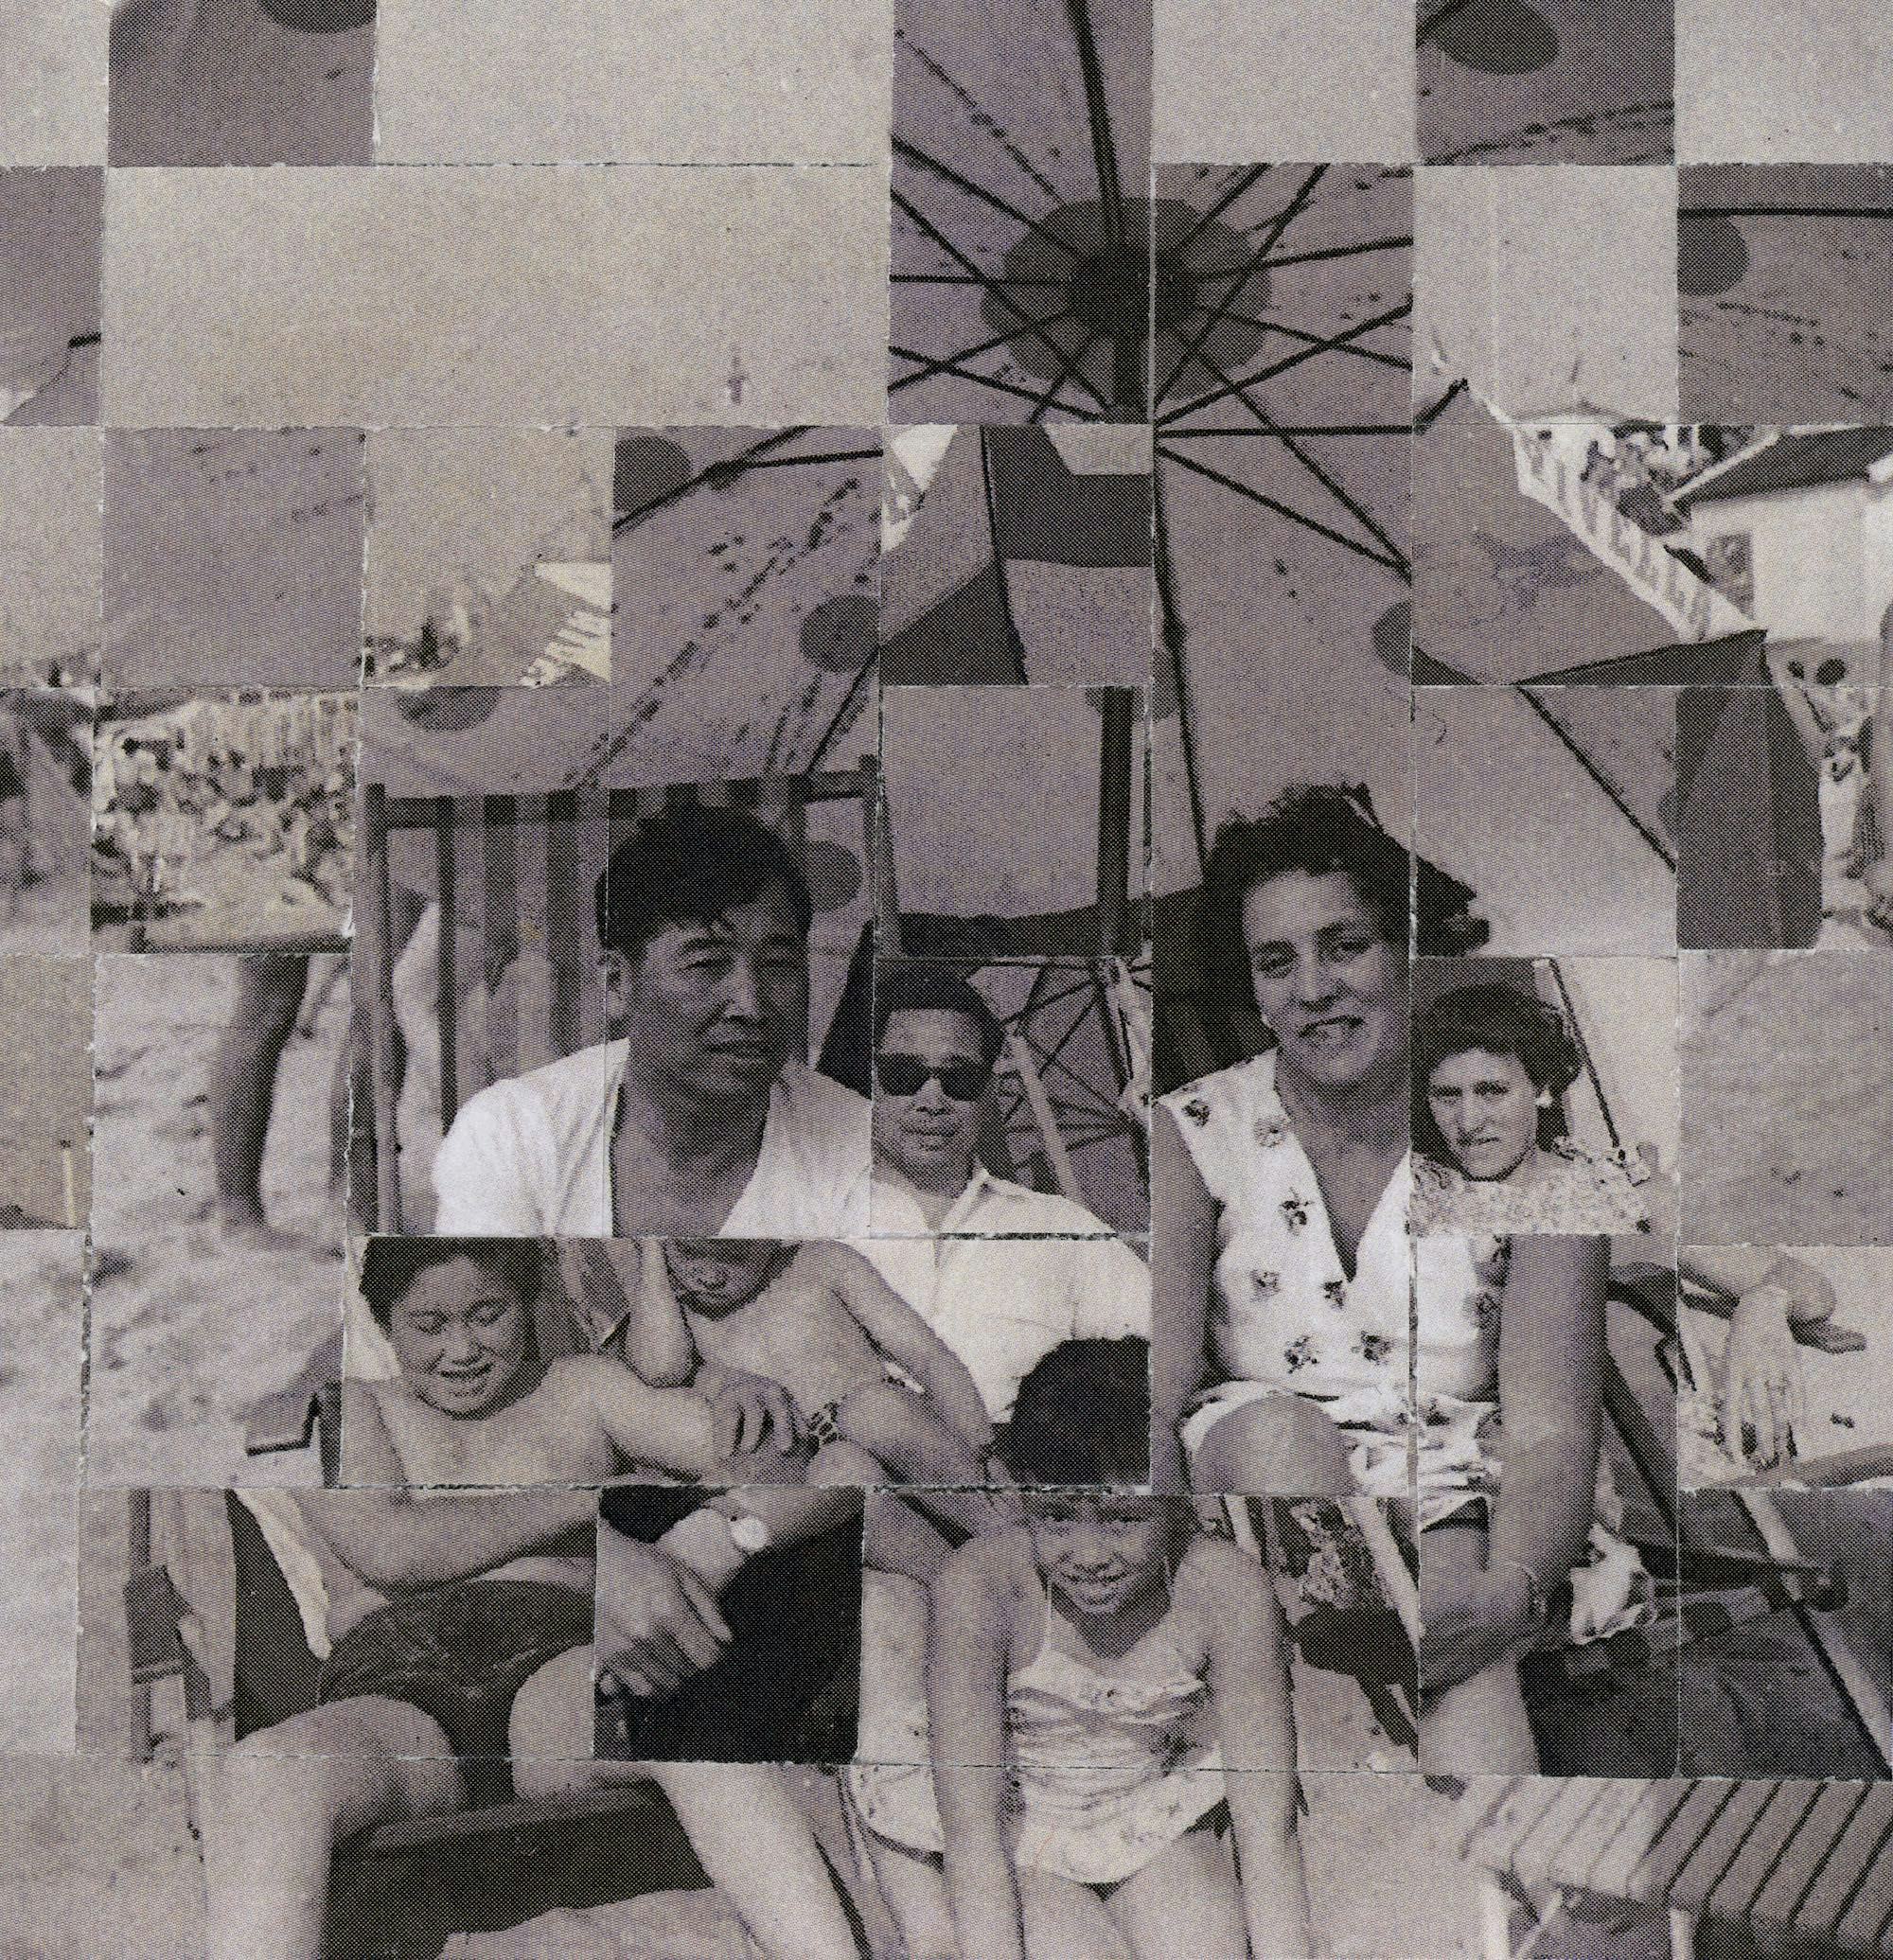 Two black and white photographs of Laura Chen's grandparents and family on the beach, woven together